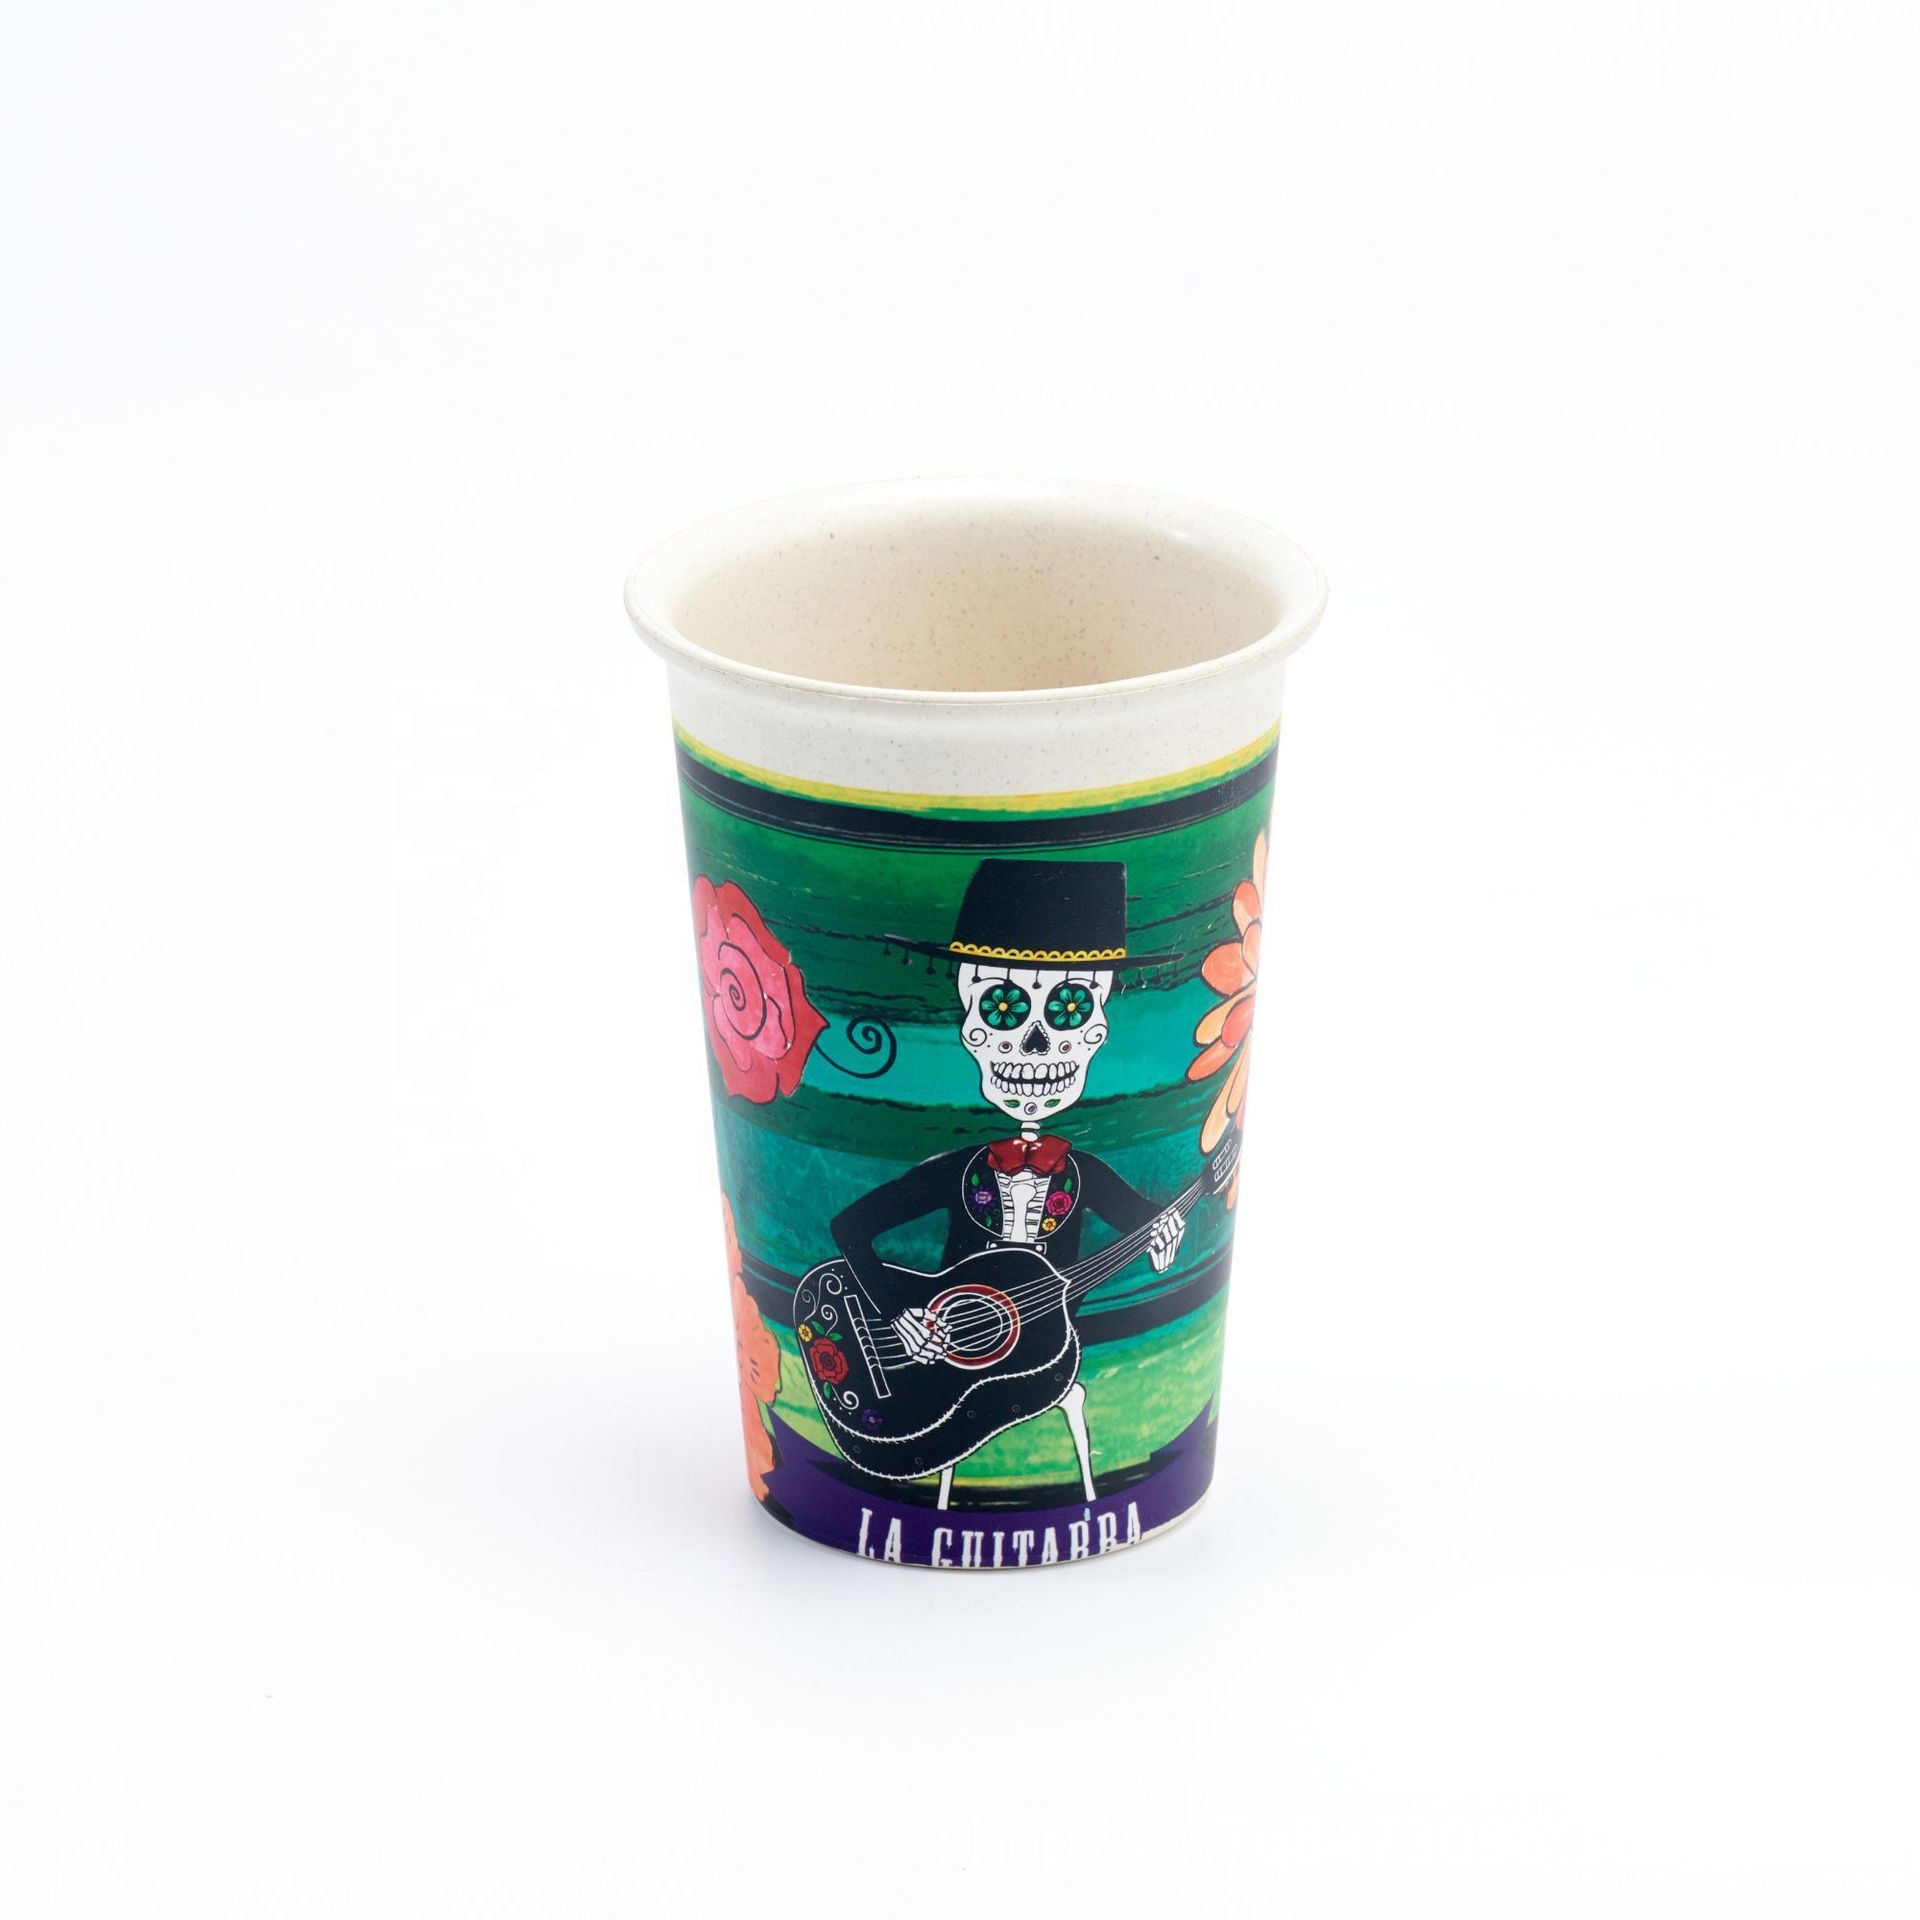 Delicate biodegradable PLA coffee cup microwavable anti scalding water cup fashionable portable portable cup